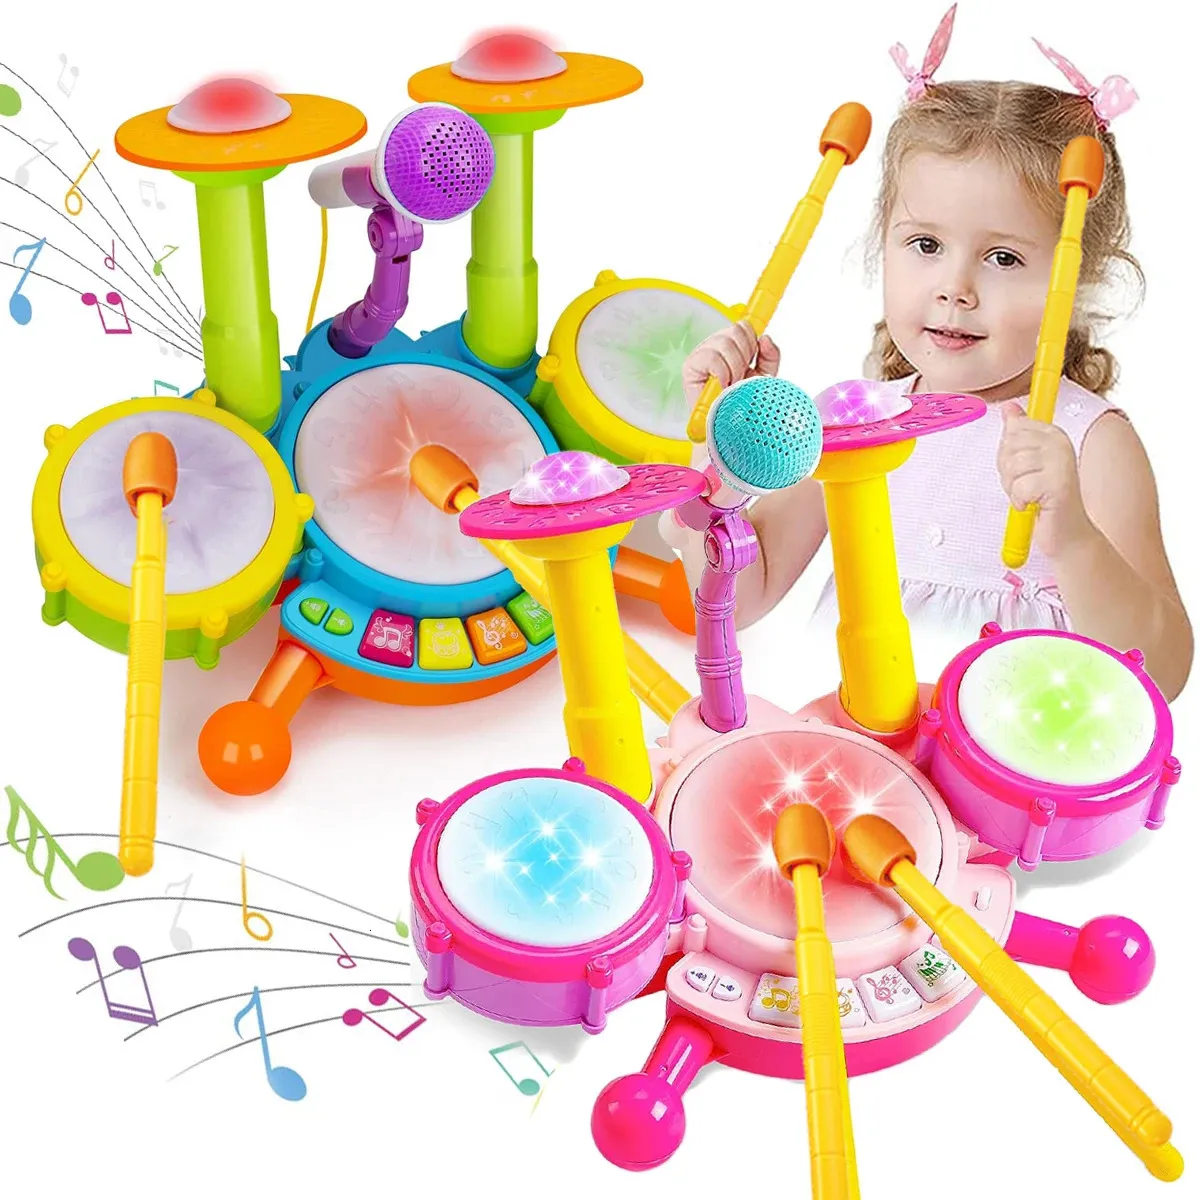 Kids Drum Set Toddlers Musical Baby Educational Instruments Toys for Girl Microphone Learning Activities Gifts 231228